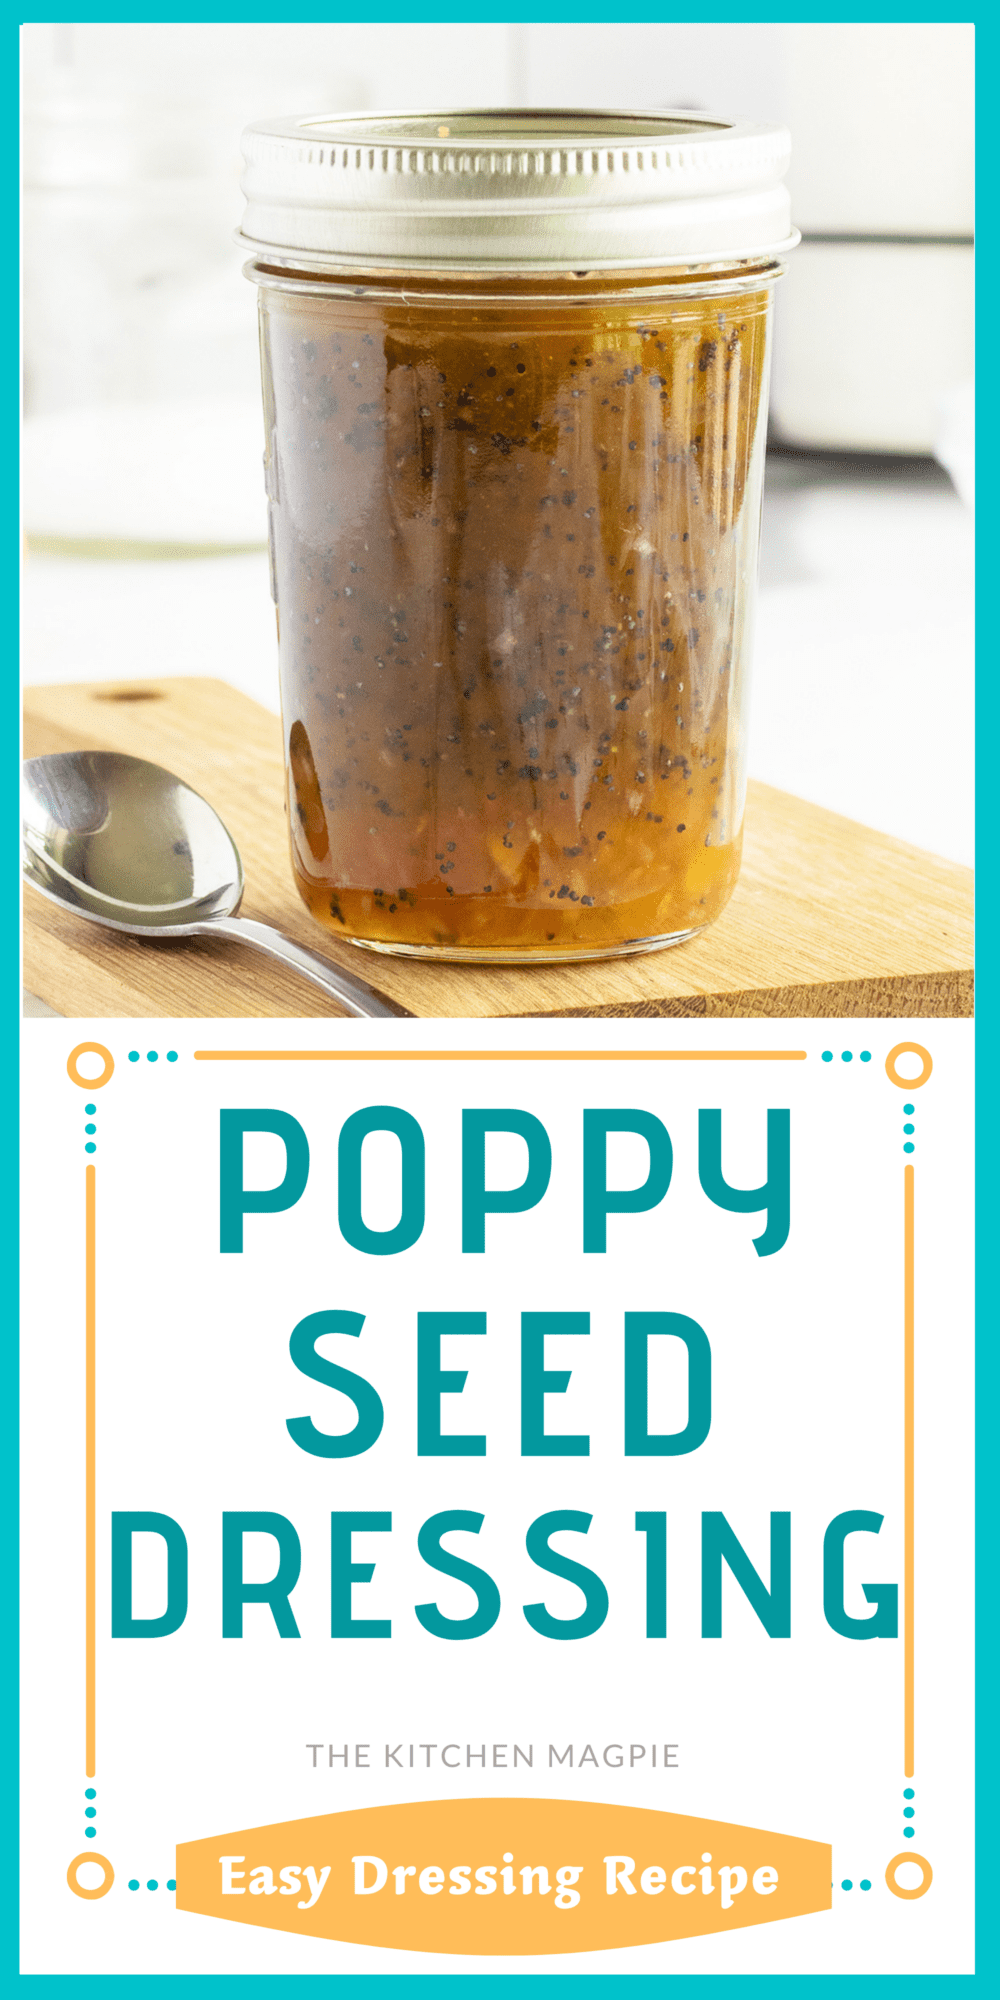 Poppy seed dressing is an underused but incredibly delicious dressing, perfect for all kinds of different recipes. 